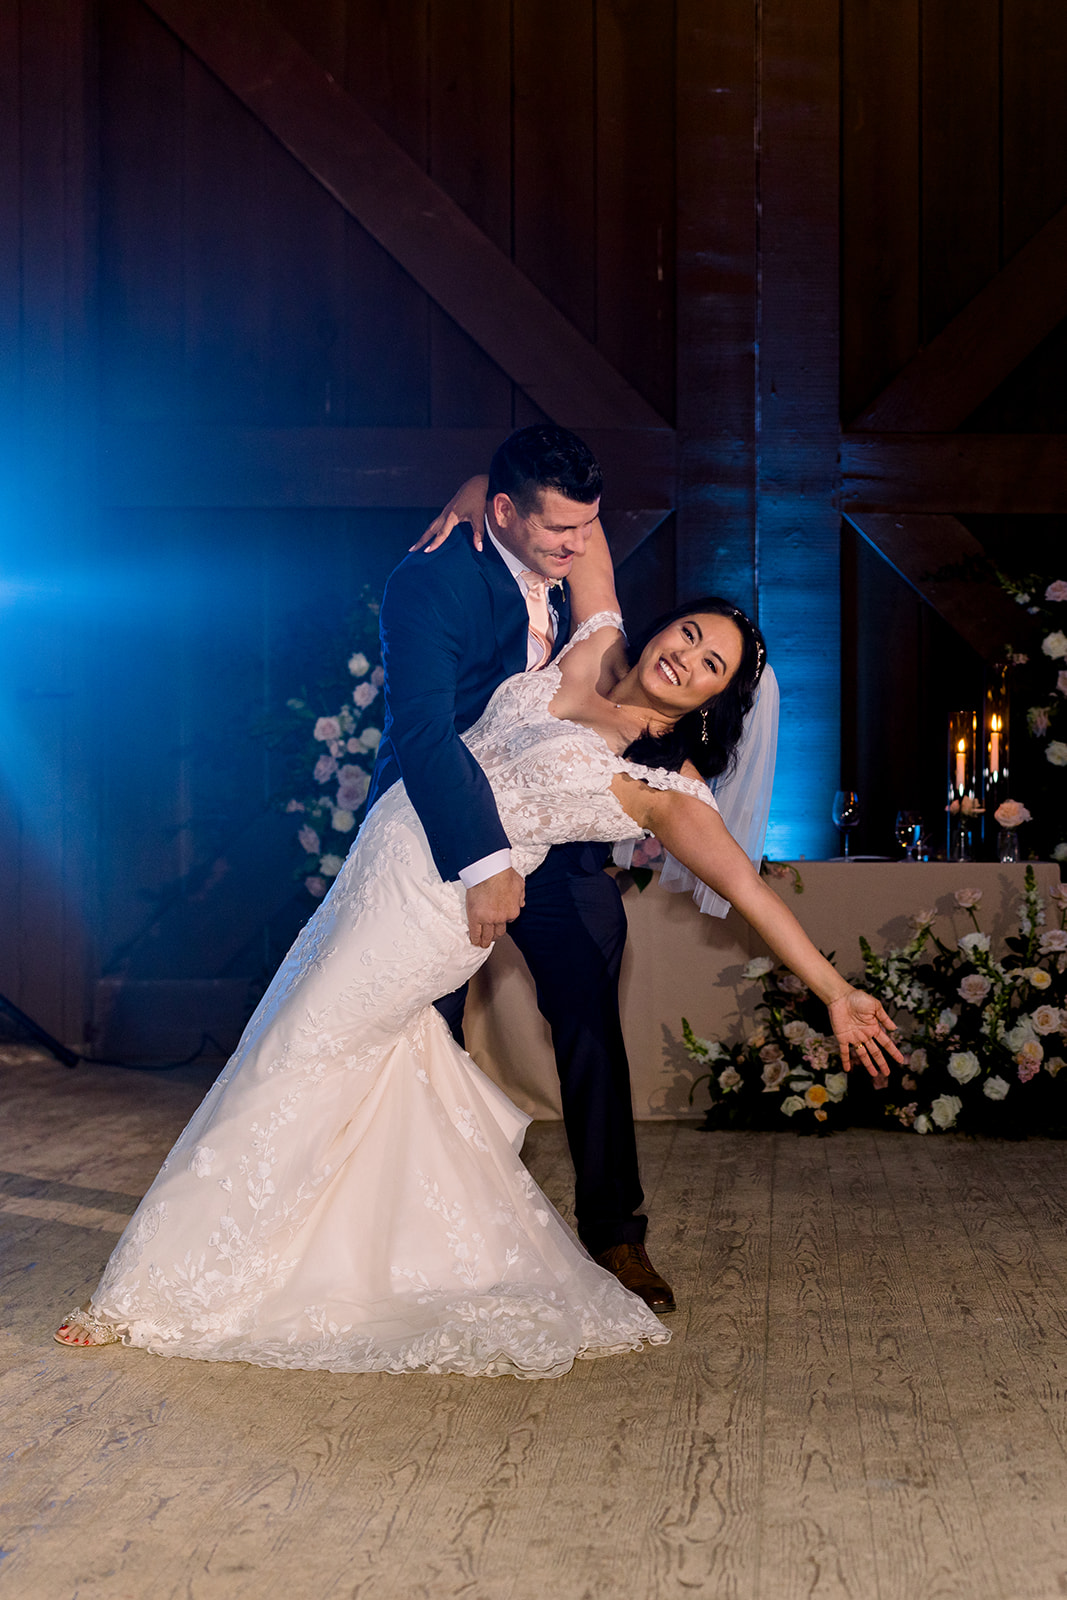 Rhoda's natural beauty shines as she twirls in her wedding gown, creating a moment of pure elegance.